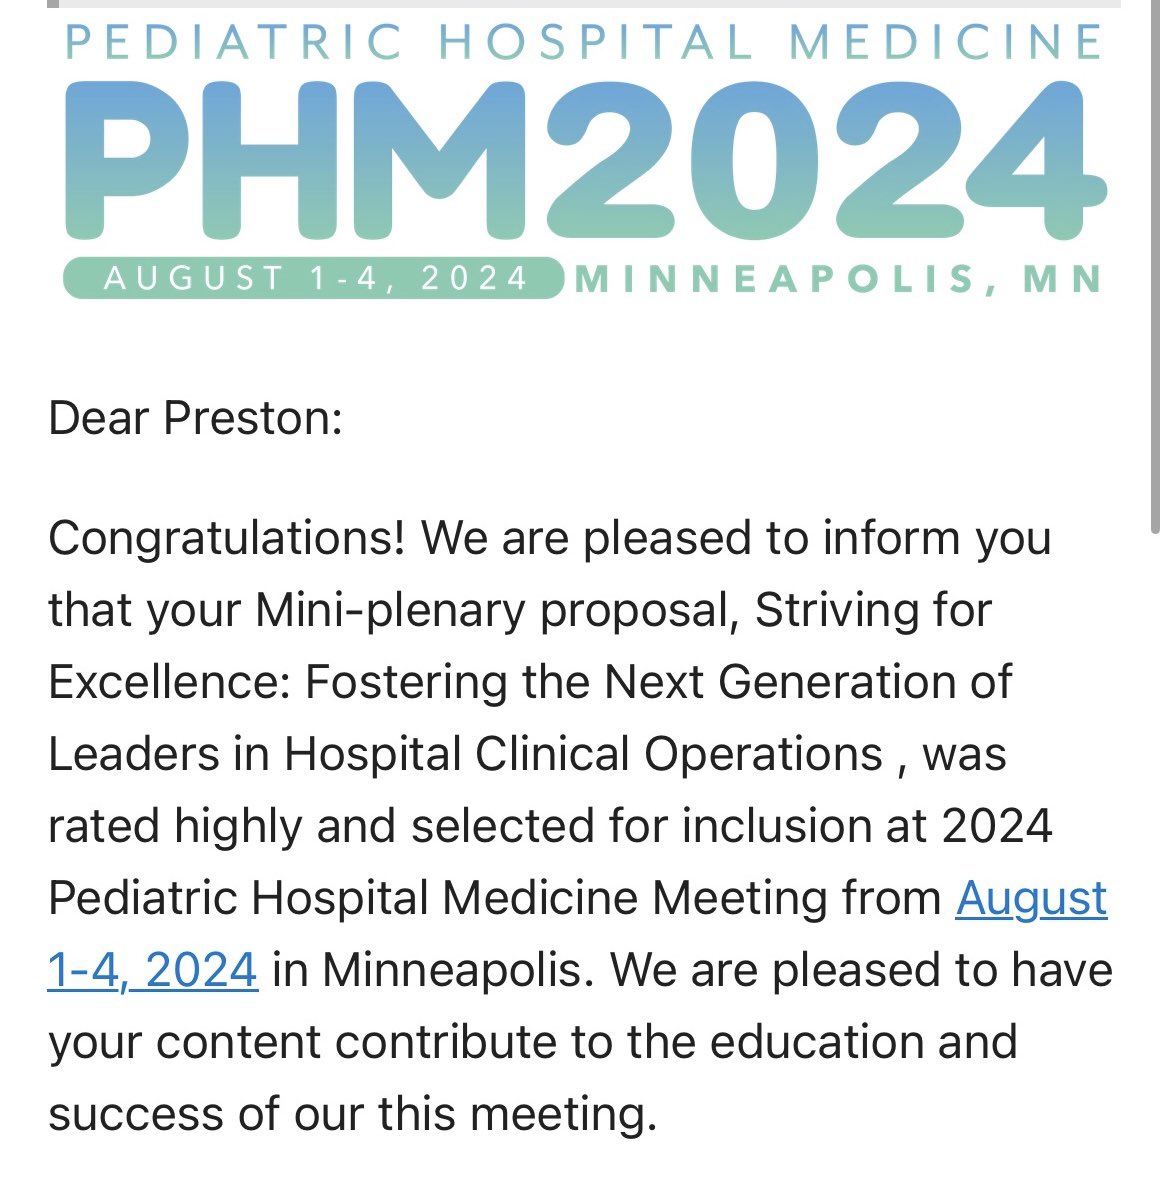 So excited to share our work at the upcoming #PHM2024 conference! @ChildrensPhila @choppedsres